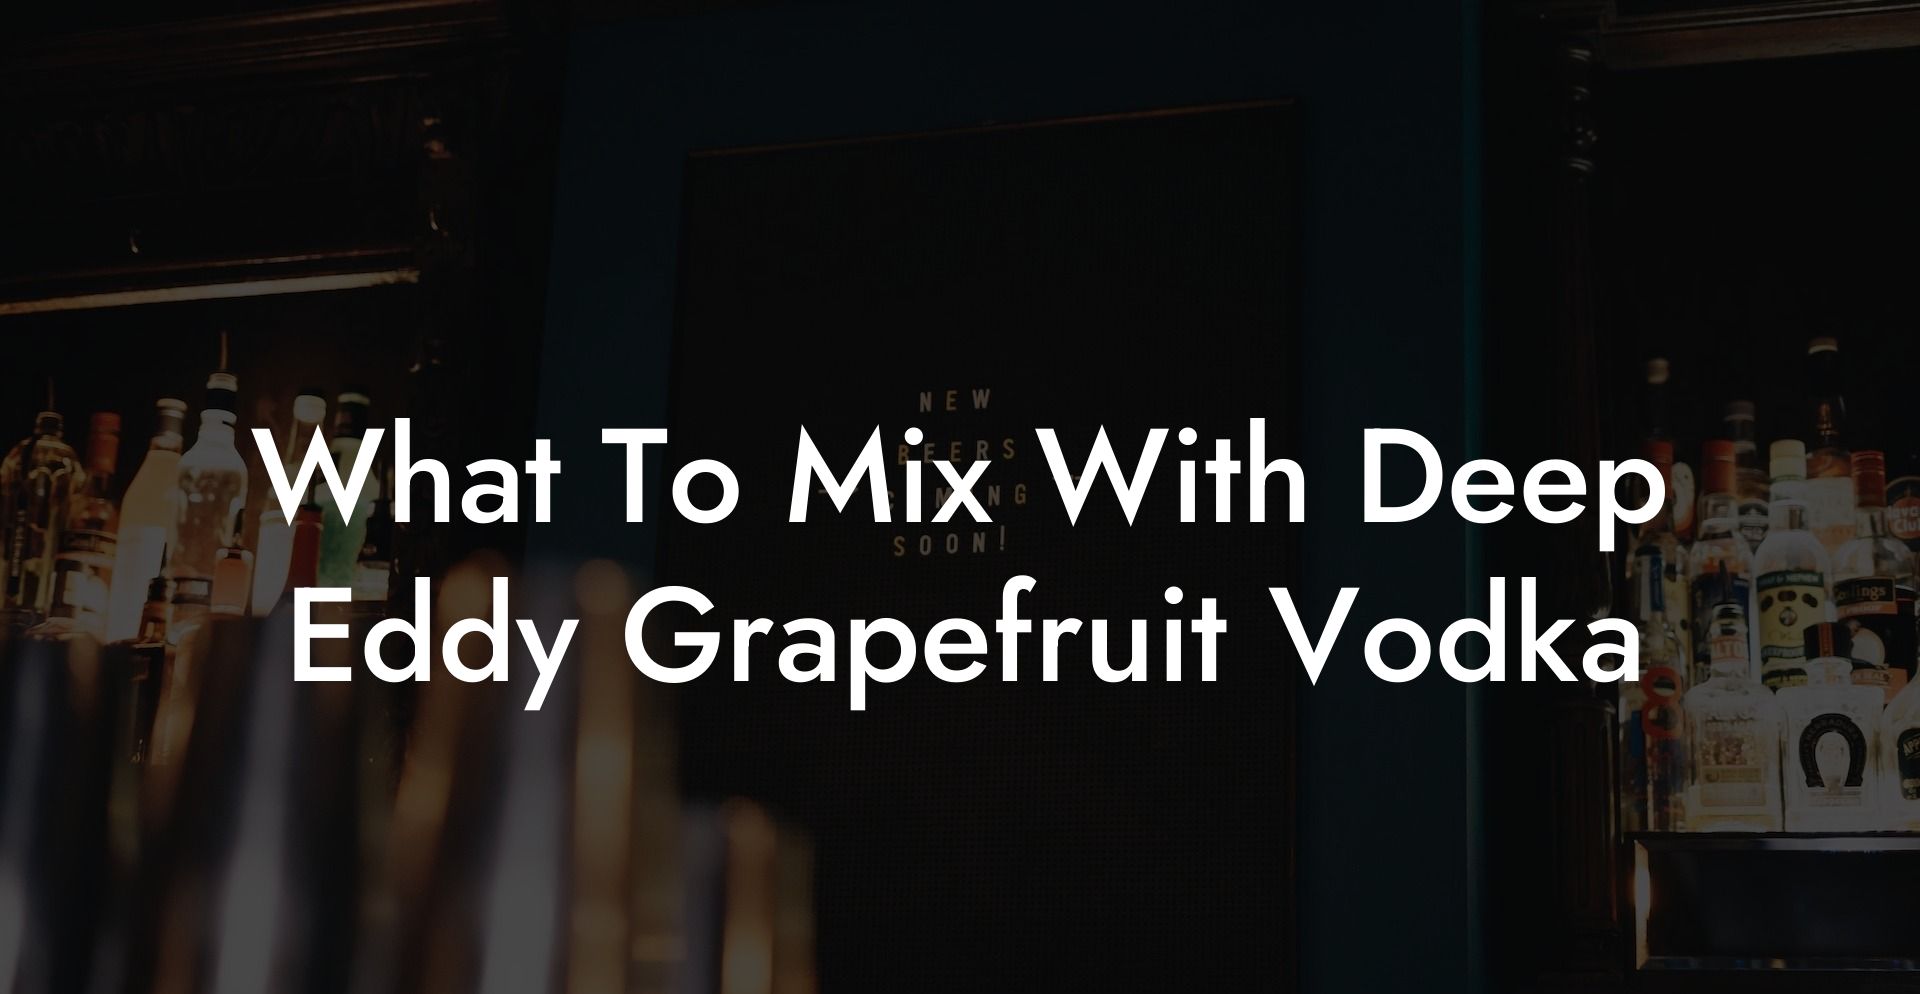 What To Mix With Deep Eddy Grapefruit Vodka